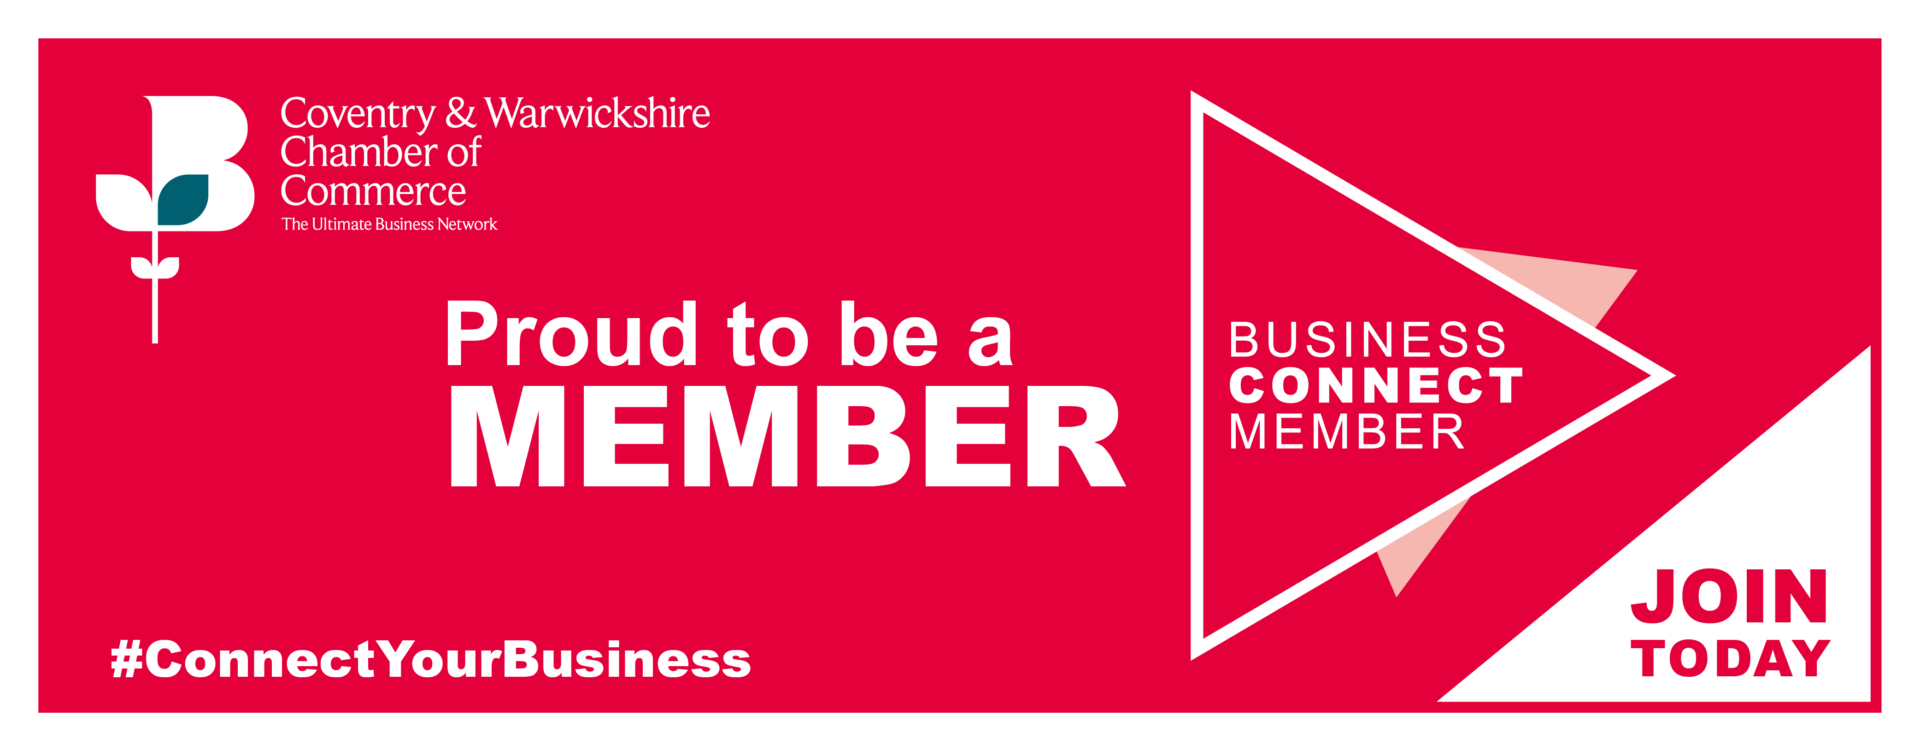 Coventry & Warwickshire Chamber of Commerce Member